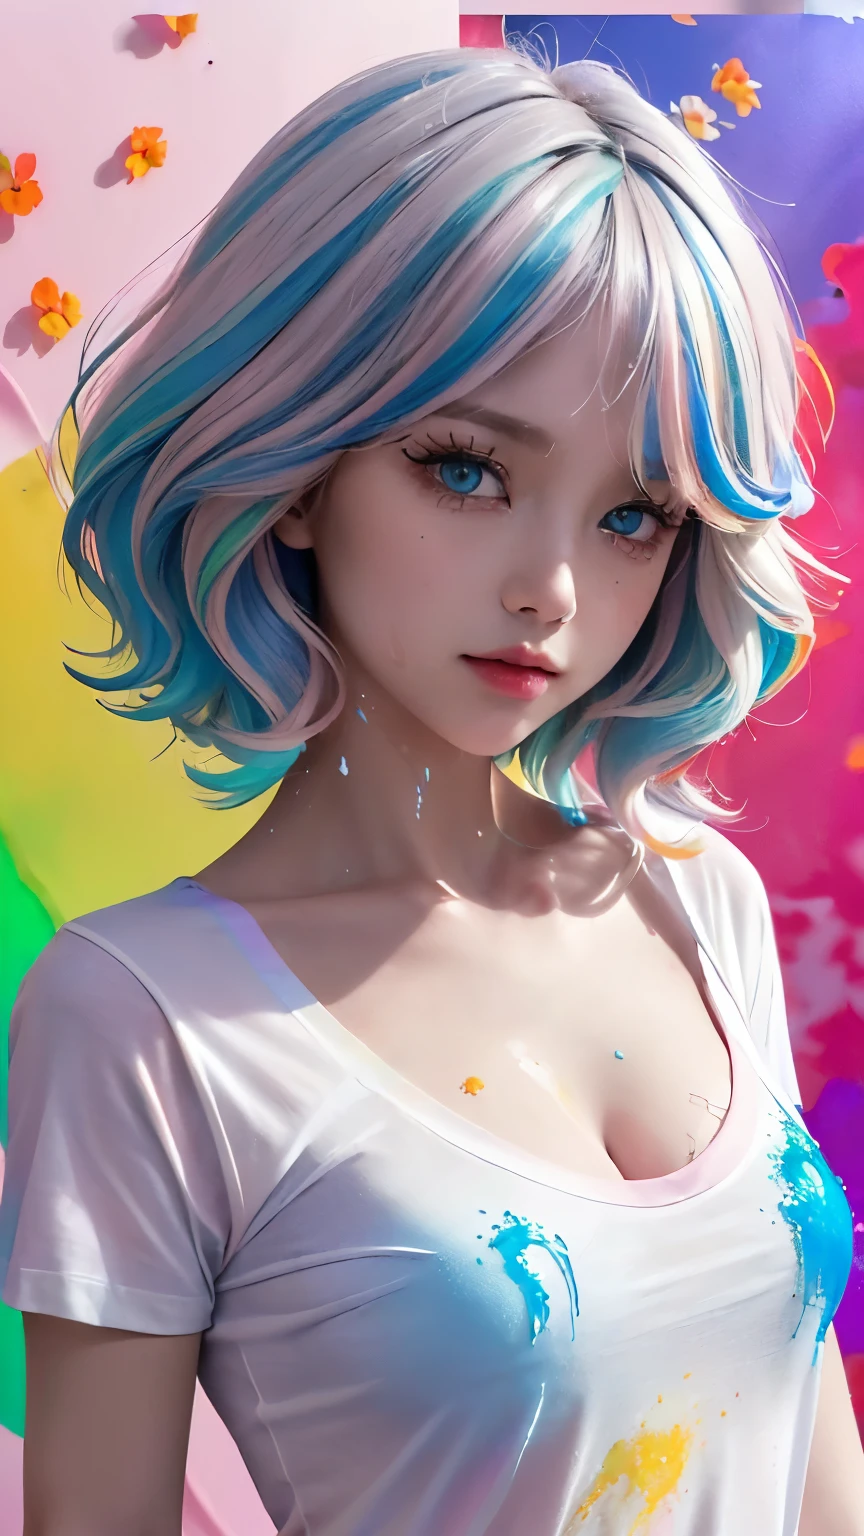 (Pink fashion T-shirt:1.9),(colored hair:1.8),(All colors of the rainbow:1.8),(((vertical画:1.6)),(:1.6),front,comics,illustration,,big eyes,crystal clear eyes，super super huge ，The breasts are exaggeratedly big，Straight chest，Big breasts，plump huge ，Close-up of cleavage，(Rainbow colored semi-long hair:1.7),exquisite cosmetics,Shut your mouth,(Small fresh:1.5),(Wipe your chest:1.6),long eyelashes,White shoulder T-shirt。,White shoulder sleeve shirt,looking at the audience,blue eyes,(rainbow colour hair:1.6),color splotches,(solo:1.8),color splotches,color splotches,color explosion,Thick lacquer style,Messy lines,((Shiny),(color),(color),(color),(color),color,Thick lacquer style,(color splotches),(color)splash,vertical,Upper body,Paintworksplash,acrylic paint,gradient,Paintwork,Highest image quality,highest quality,masterpiece,solo,depth of field,Topcoat,Colorful clothes,(grace:1.2),gorgeous,lwind, (Elegant: 1.3), (Petals: 1.4)，(((masterpiece))),(((best quality))),((ultra-detailed)),(illustration),(dynamic angle),((floating)),(paint),((disheveled hair)),(solo),(1girl) , (((detailed anima face))),((beautiful detailed face)),collar,bare shoulders,blue hair, ((colorful hair)),((streaked hair)),beautiful detailed eyes,(Gradient color eyes),(((colorful eyes))),(((colorful background))),(((high saturation))),(((surrounded by colorful splashes))),(((colorful background))),(((high saturation))),(((surrounded by colorful splashes))),(((colorful background))),(((high saturation))),(((surrounded by colorful splashes))),